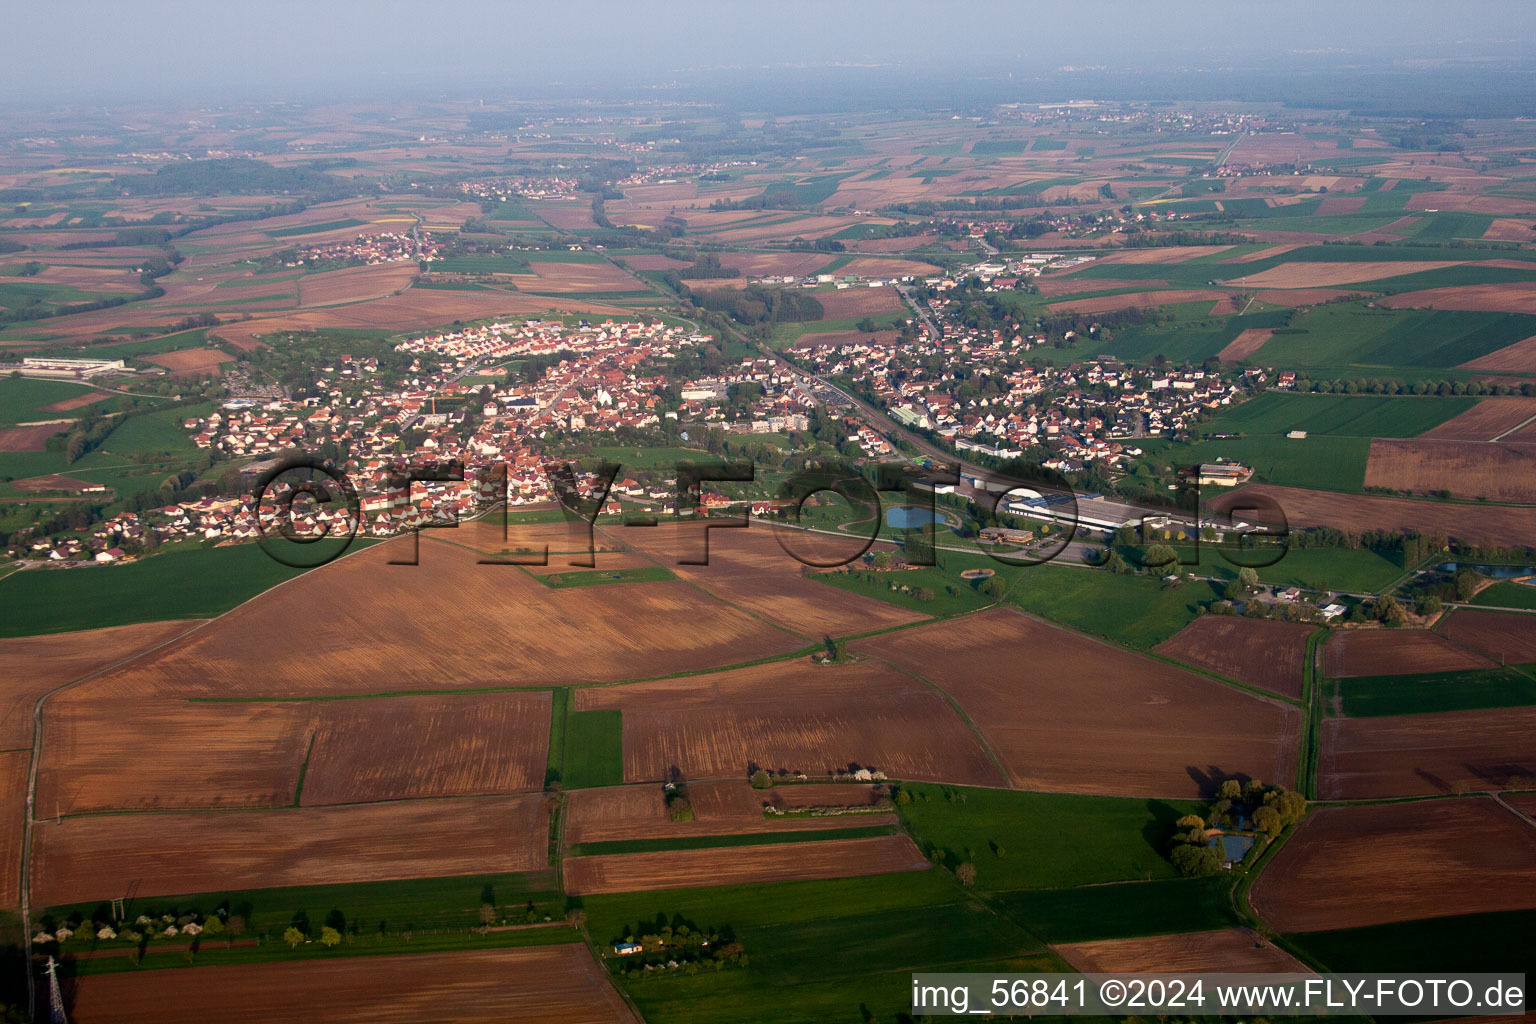 Aerial photograpy of Soultz-sous-Forêts in the state Bas-Rhin, France